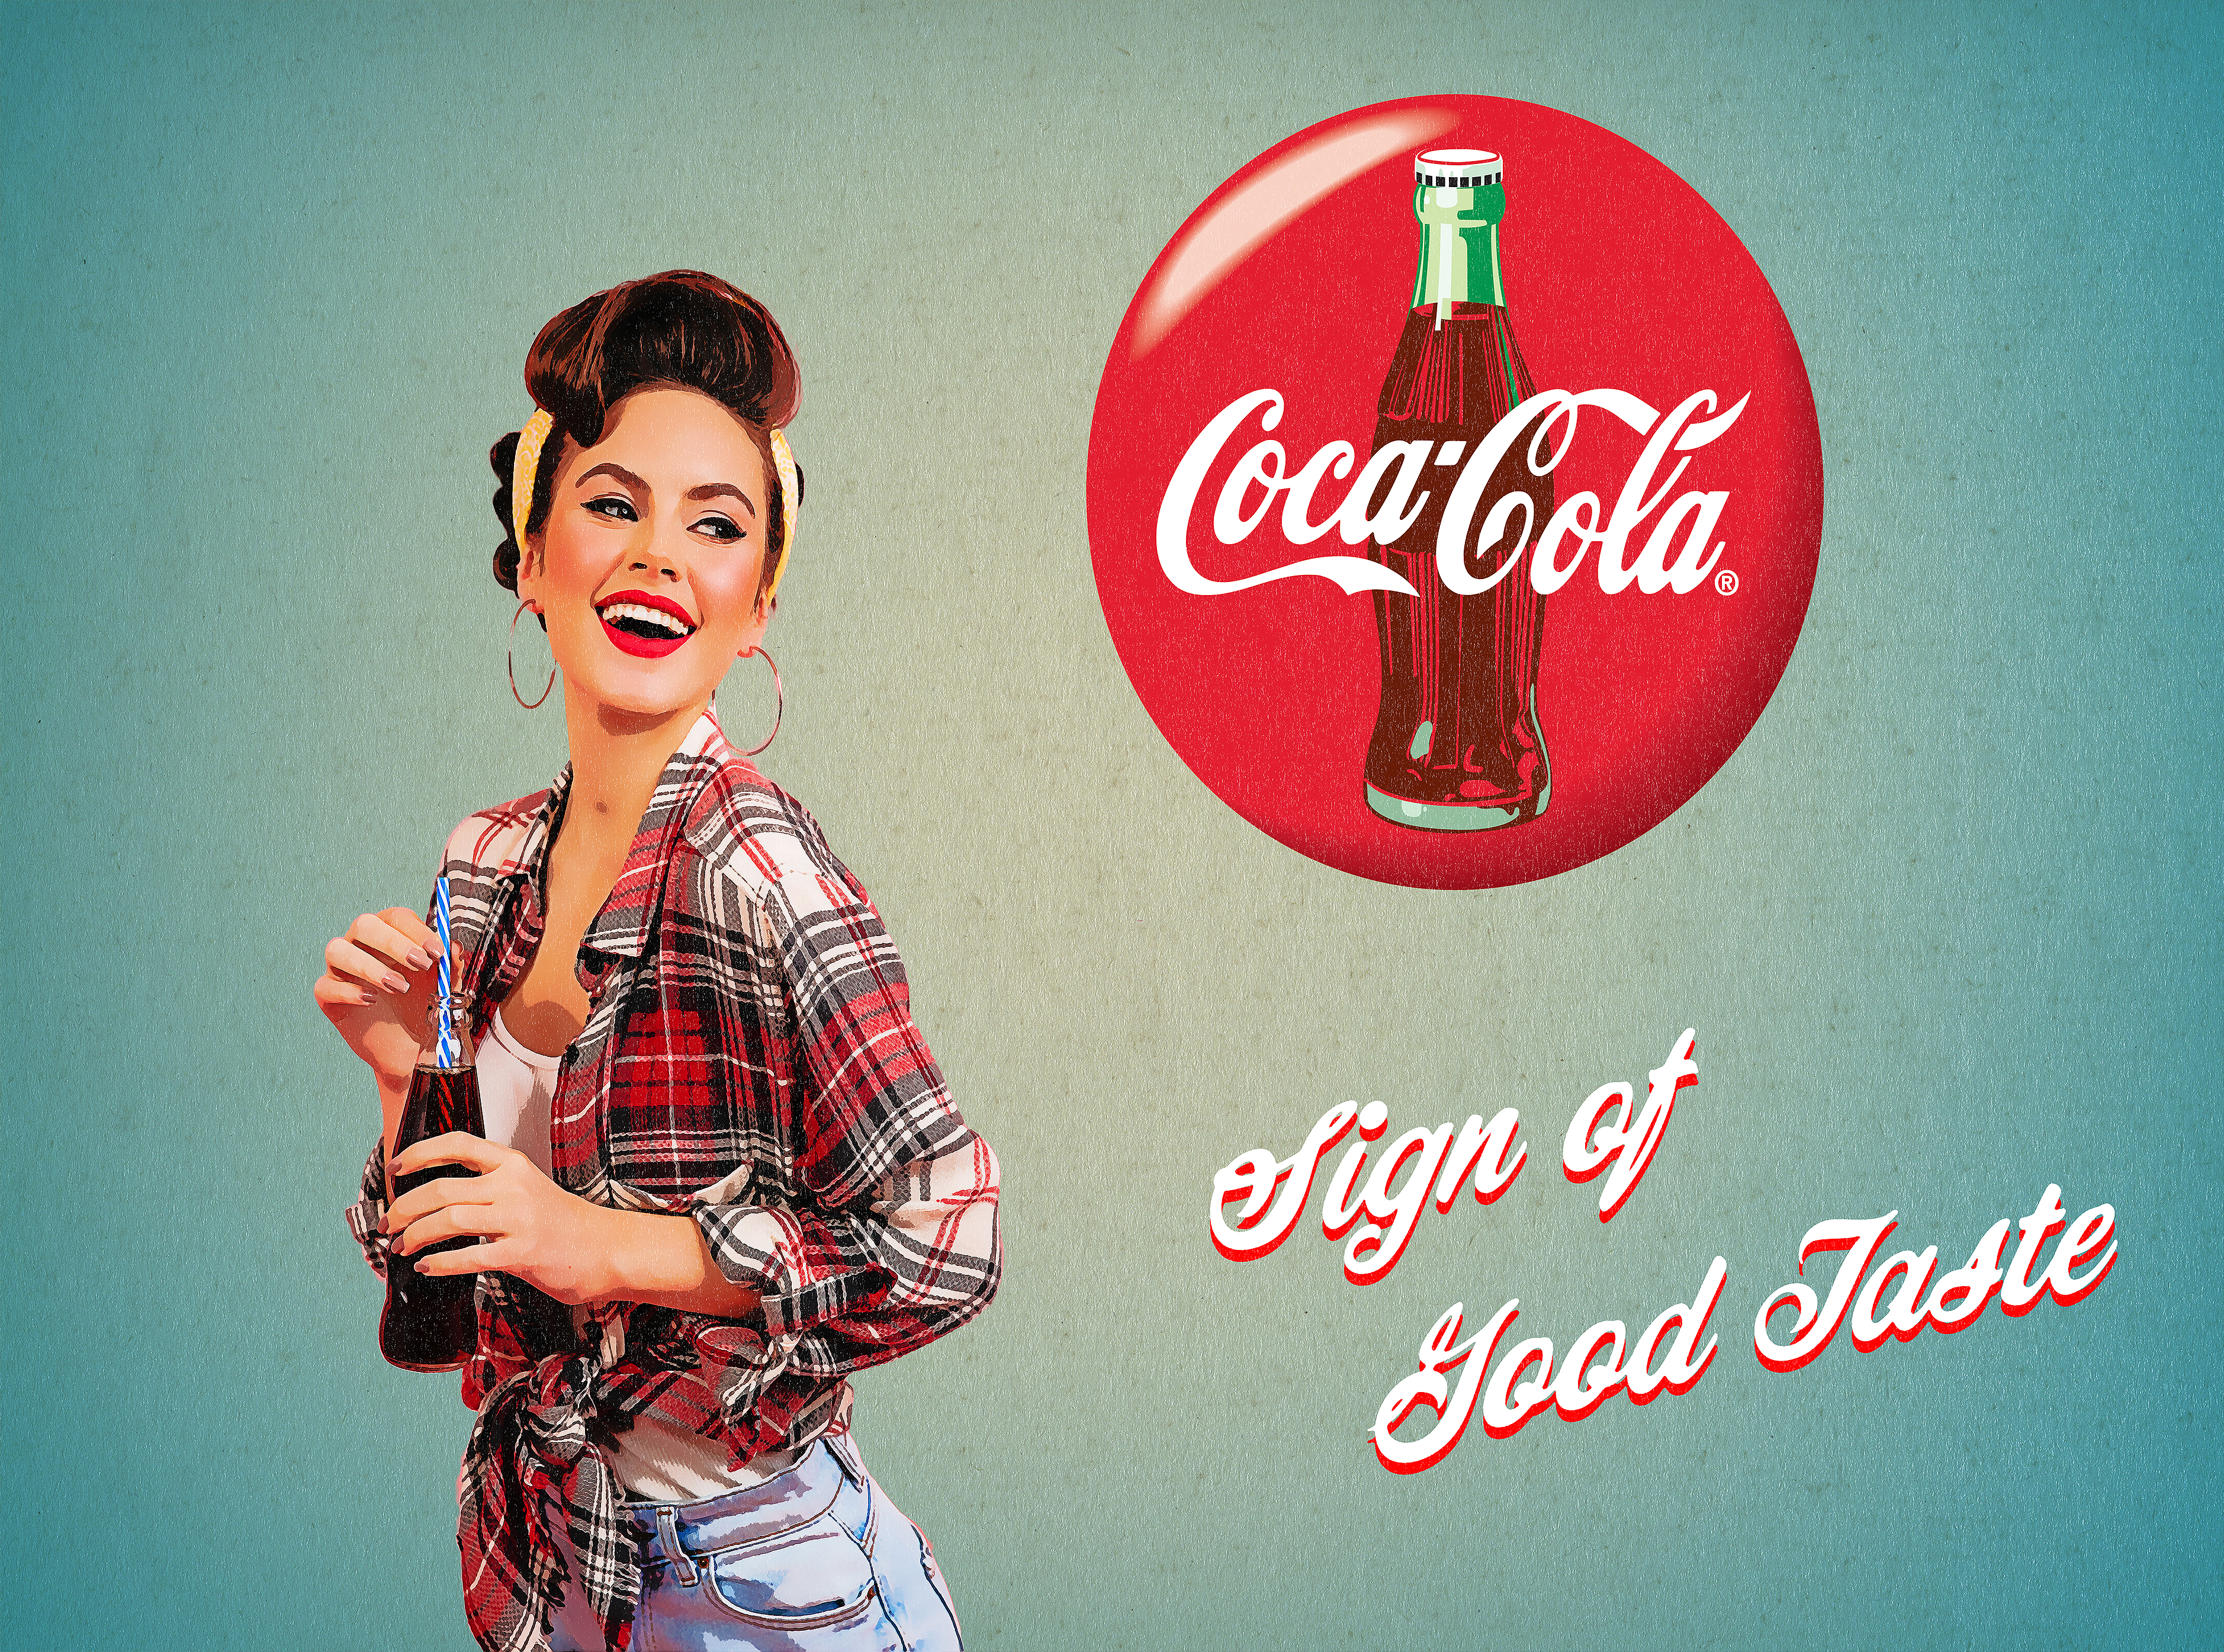 Retro Coca-Cola advertisement crafted for simulated promotional content for Coca-Cola. 2022